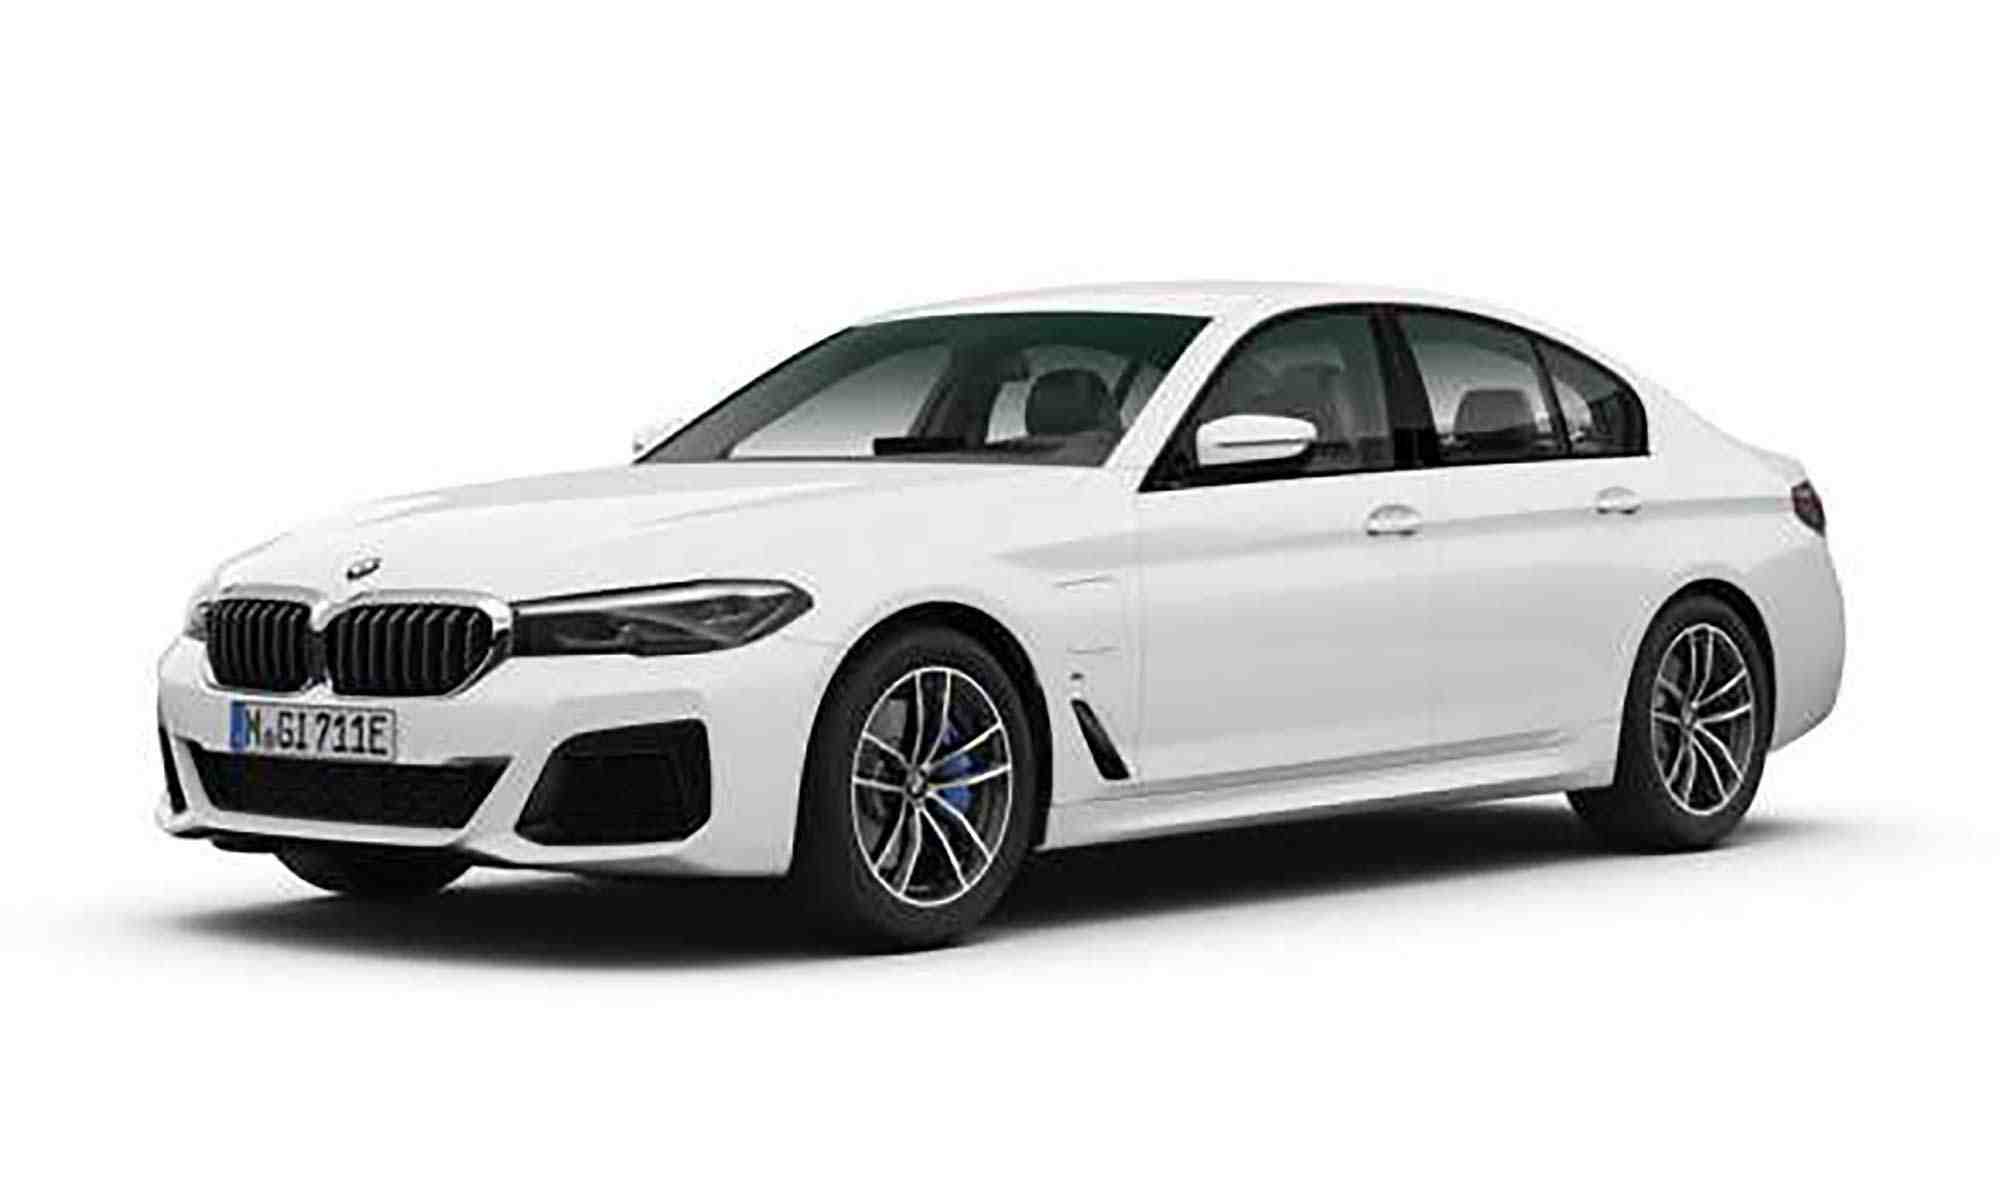 An overview of the BMW 5 series